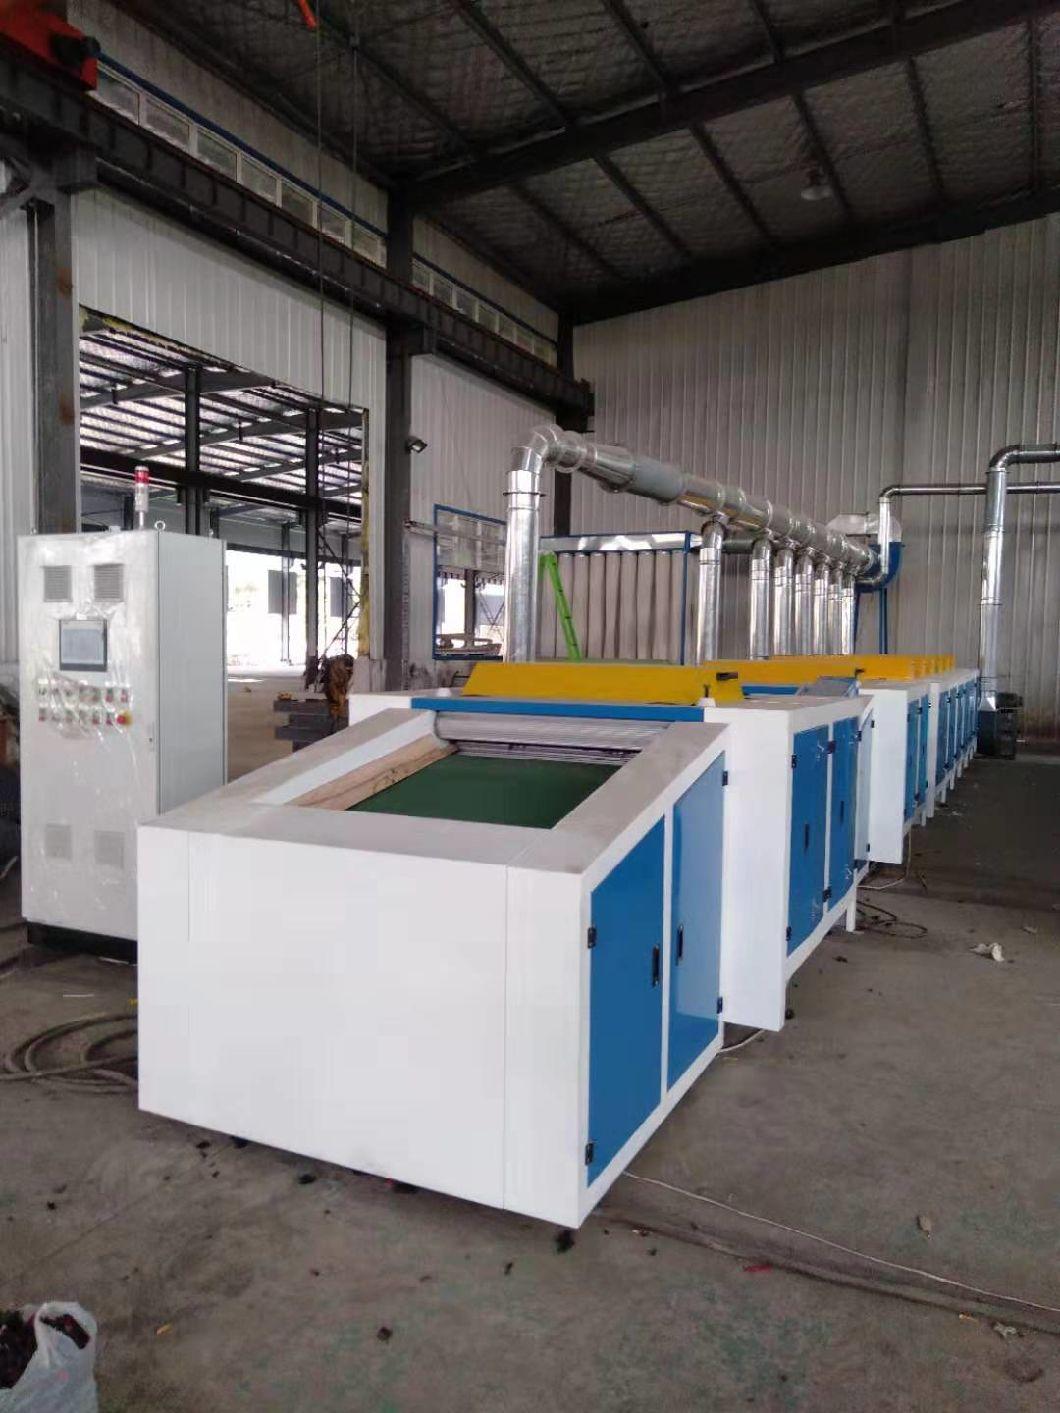 Hot Selling with CE Certificate Cotton Clips Waste Recycling Machine